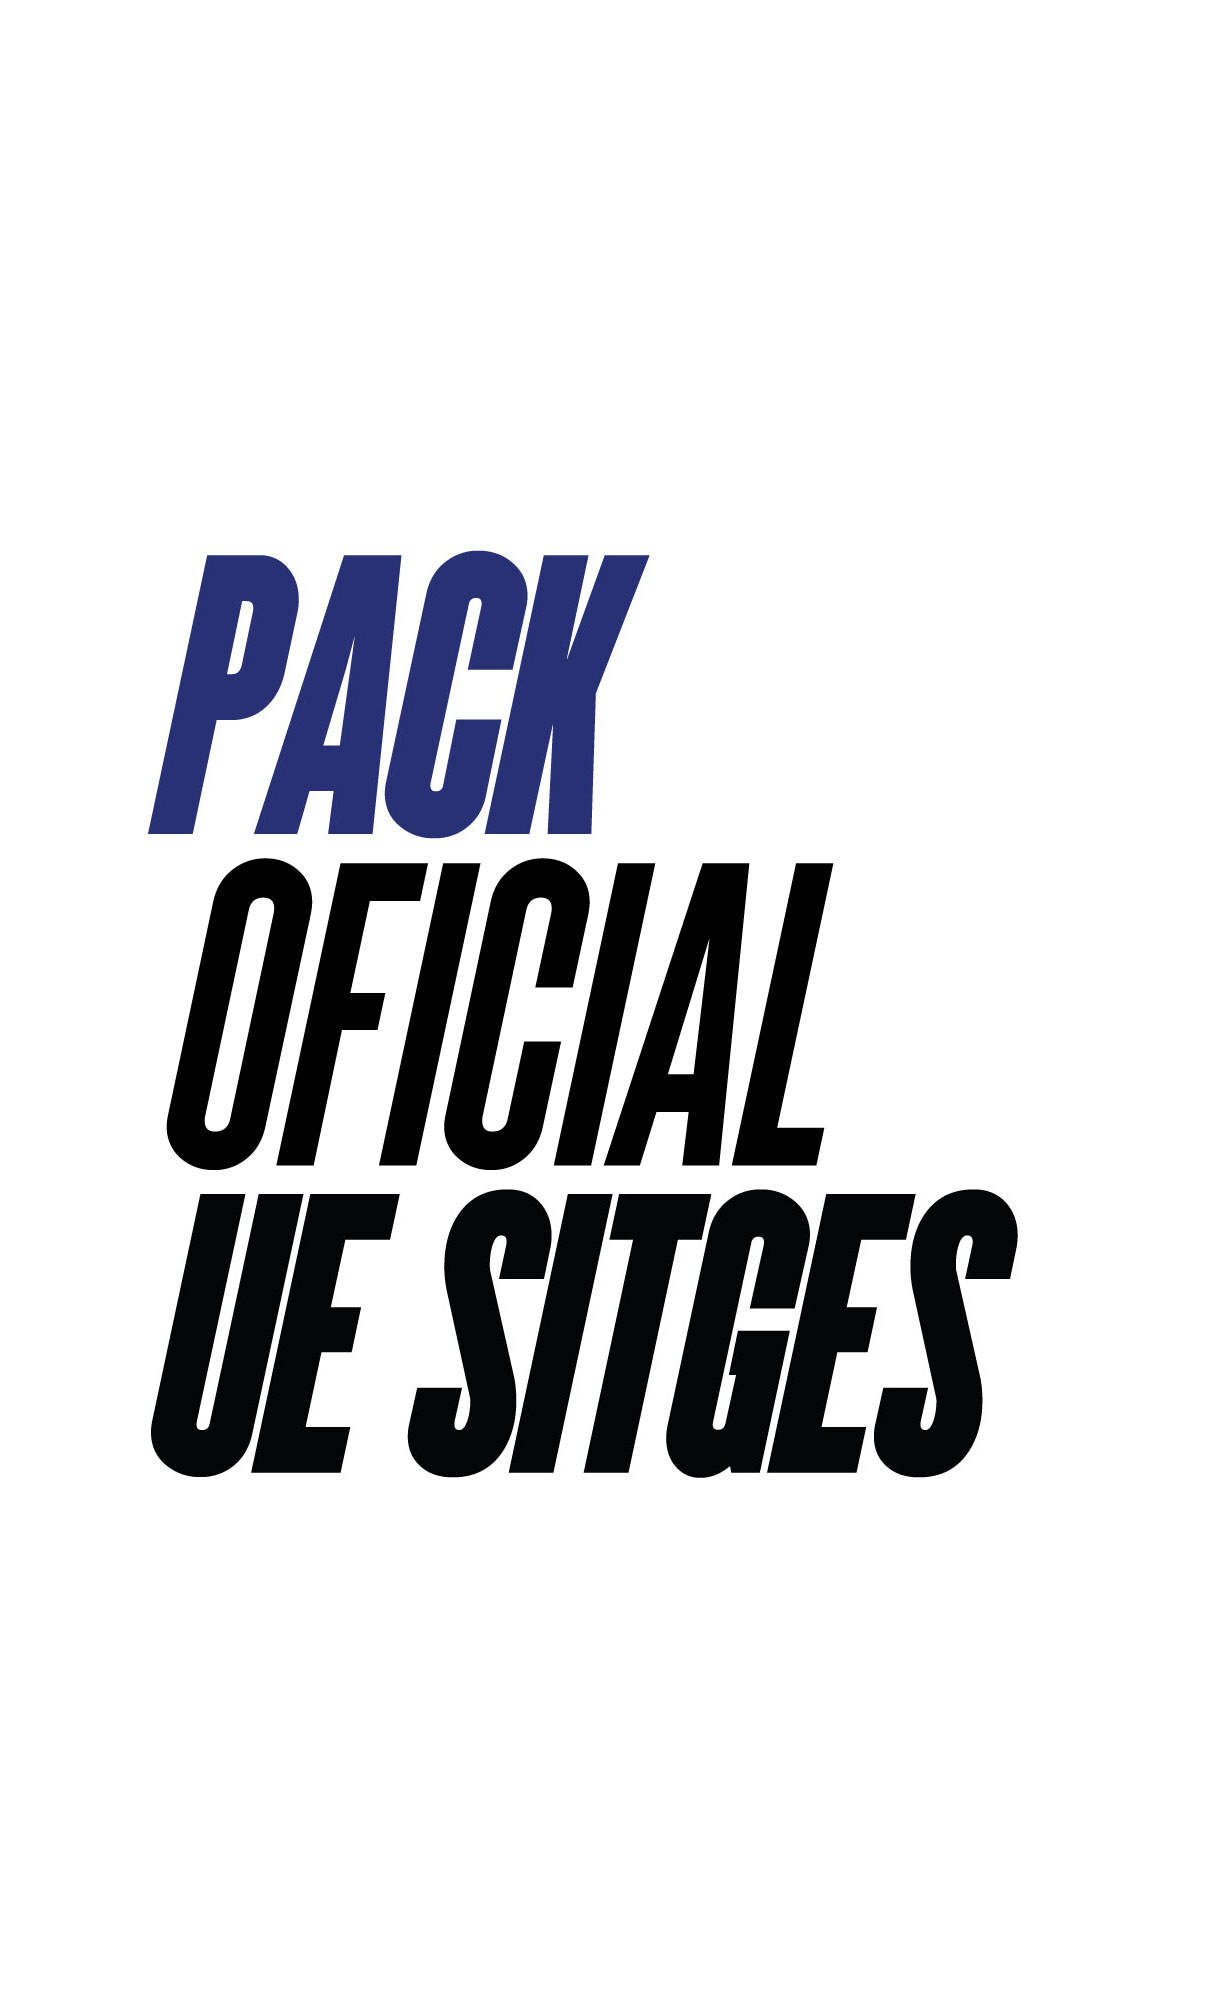 Pack Oficial UE Sitges